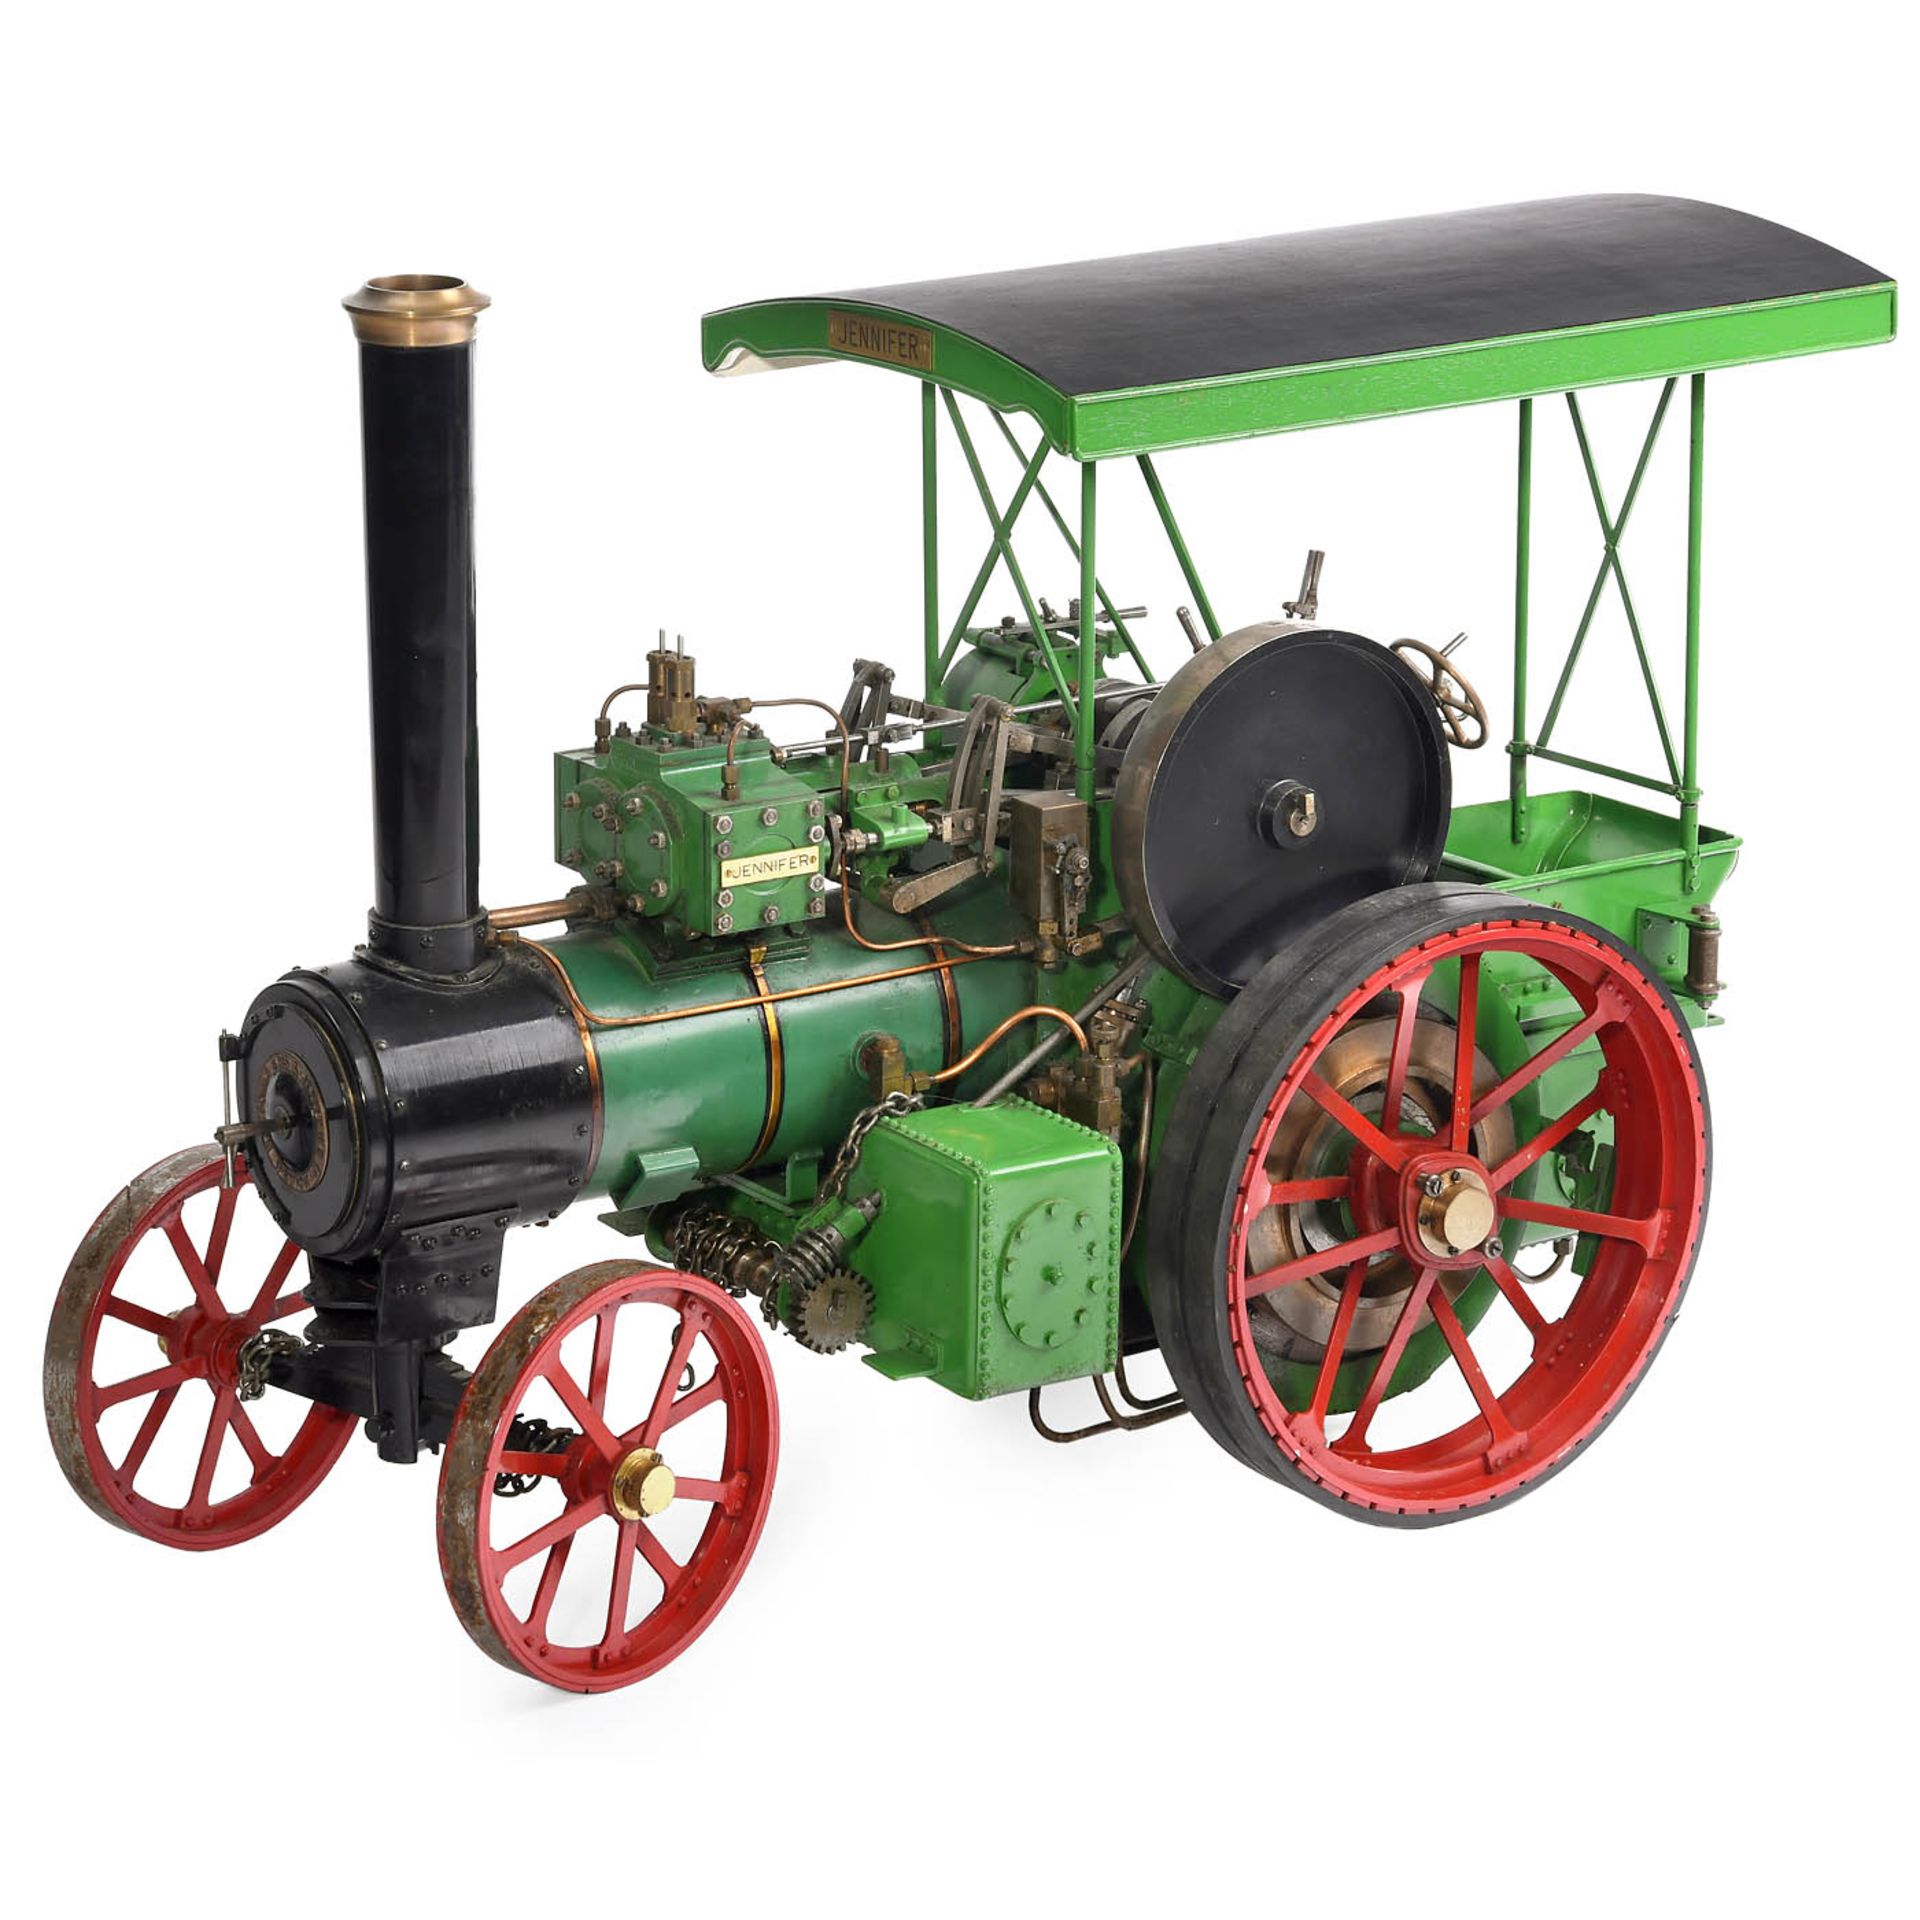 2-inch Scale Model of a Live-Steam Traction Engine "Jenifer", c. 1984 - Image 2 of 10